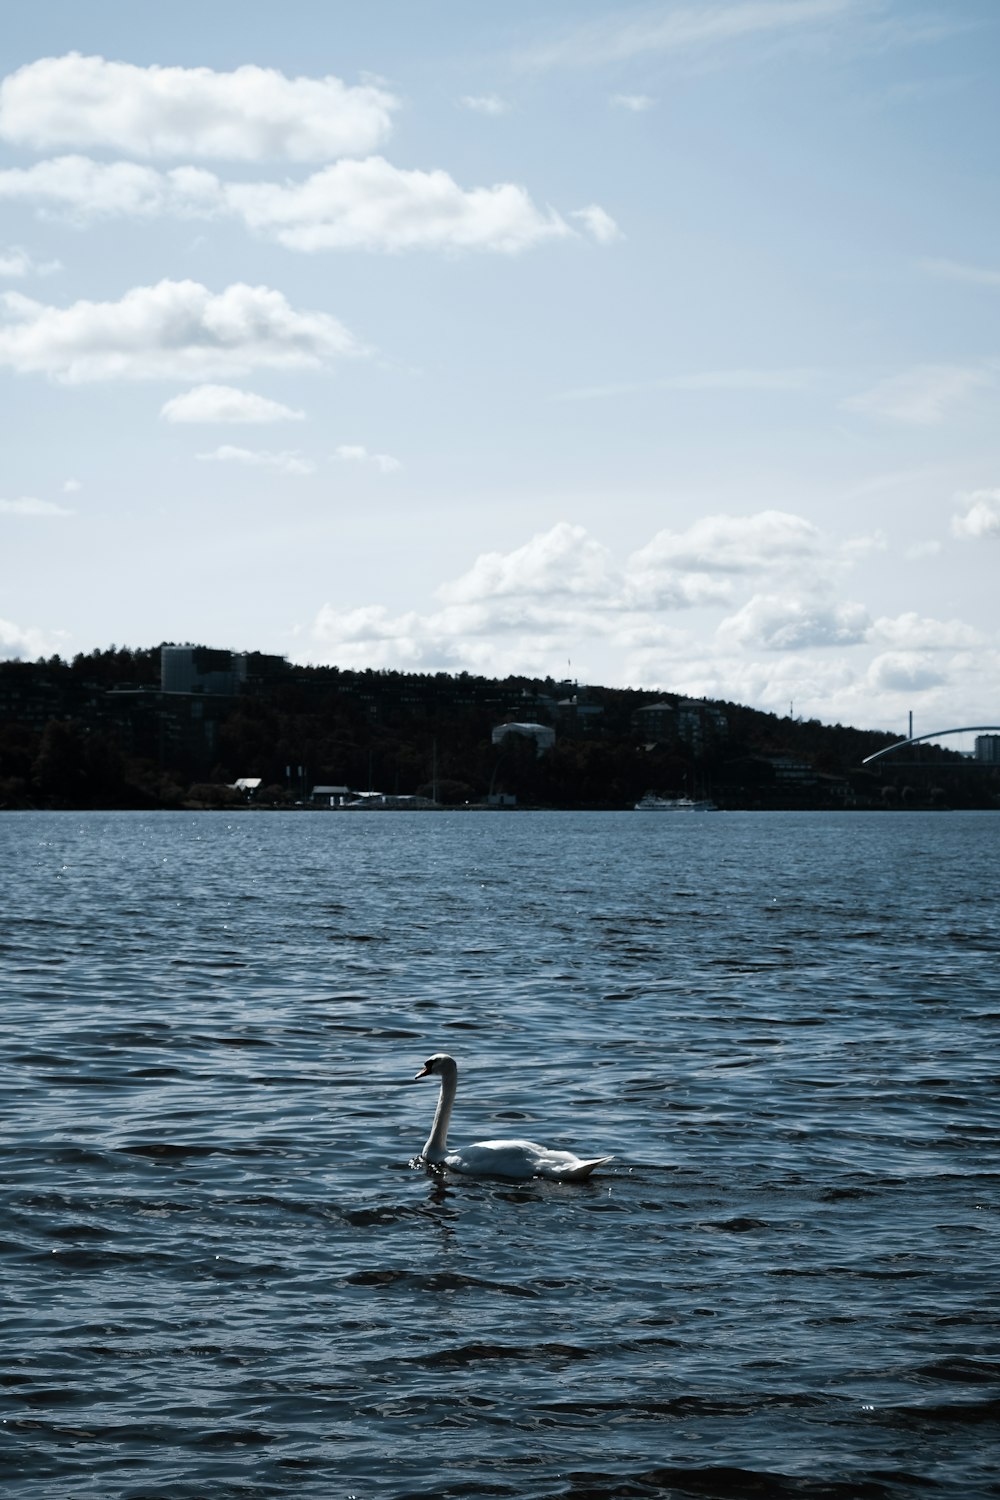 a swan is swimming in a large body of water